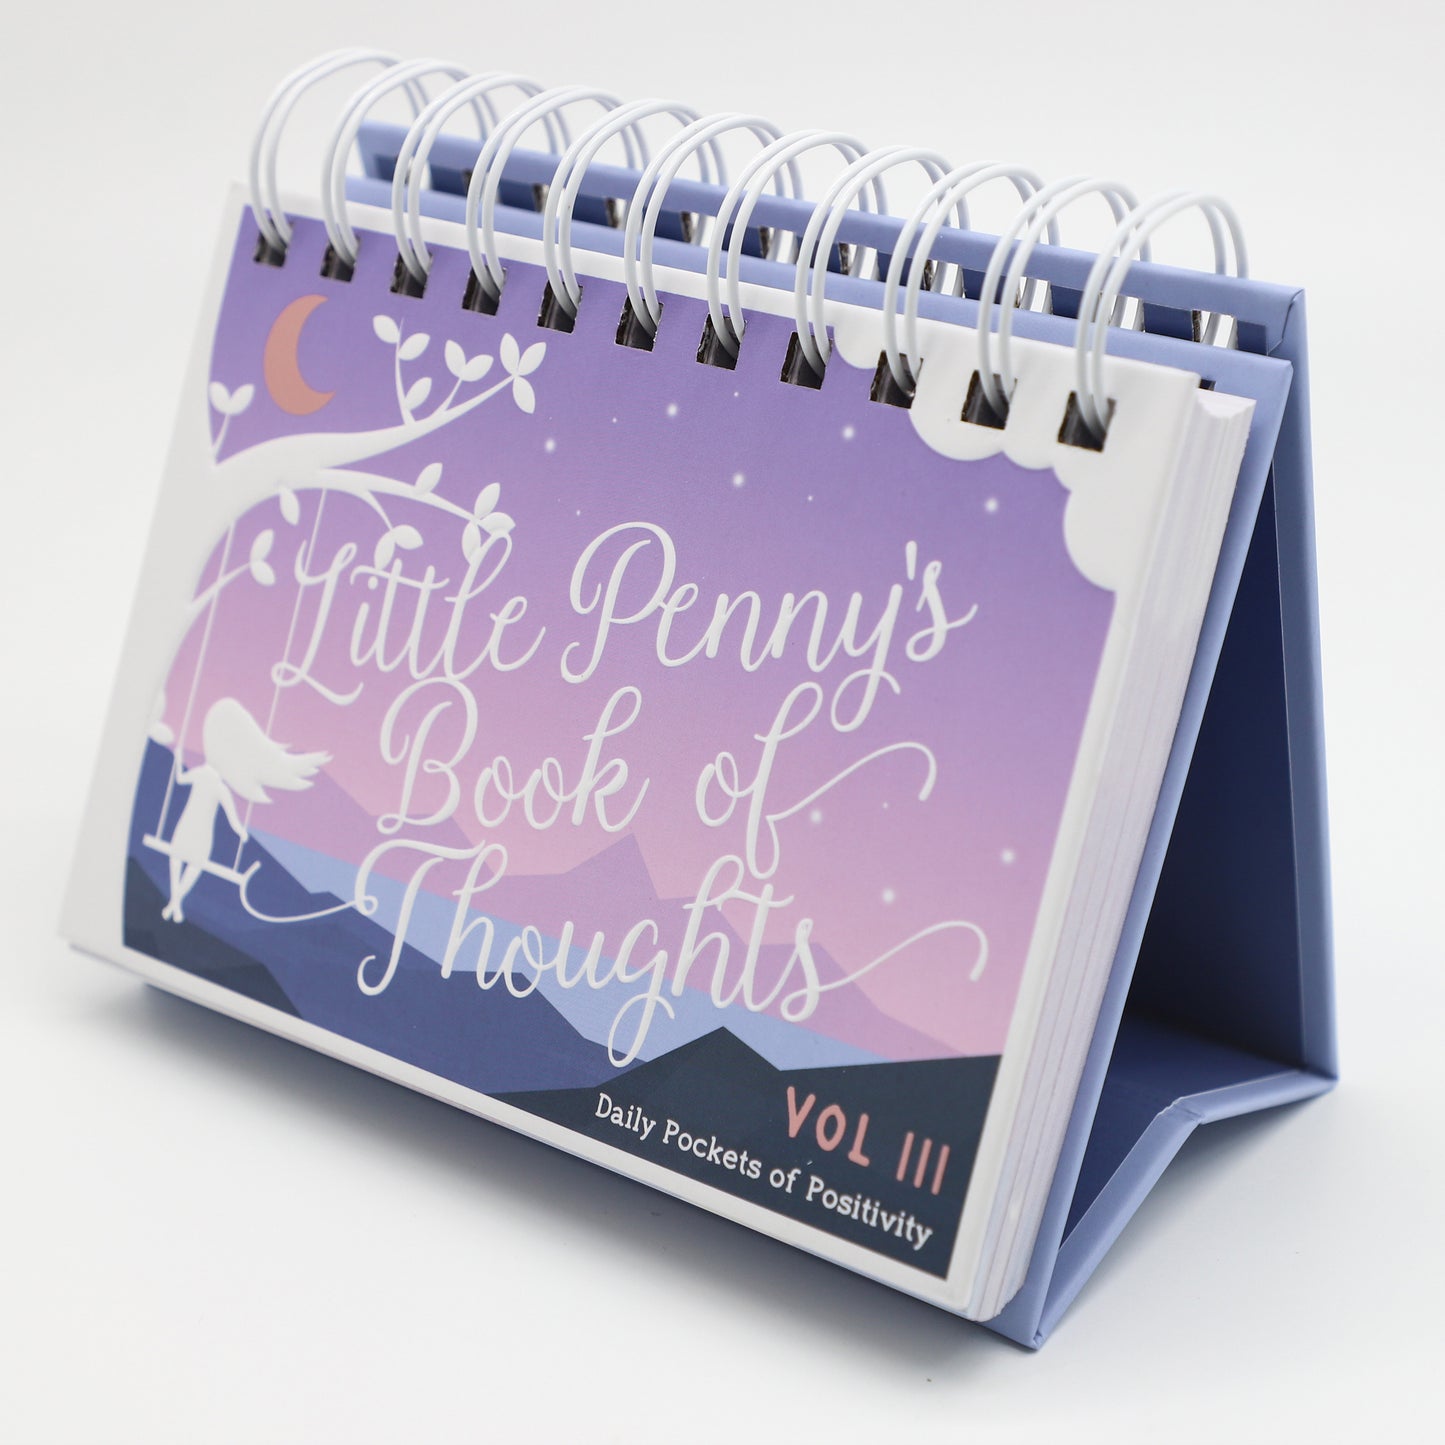 NEW - Vol III "Little Penny's Book of Thoughts" Flip Calendar